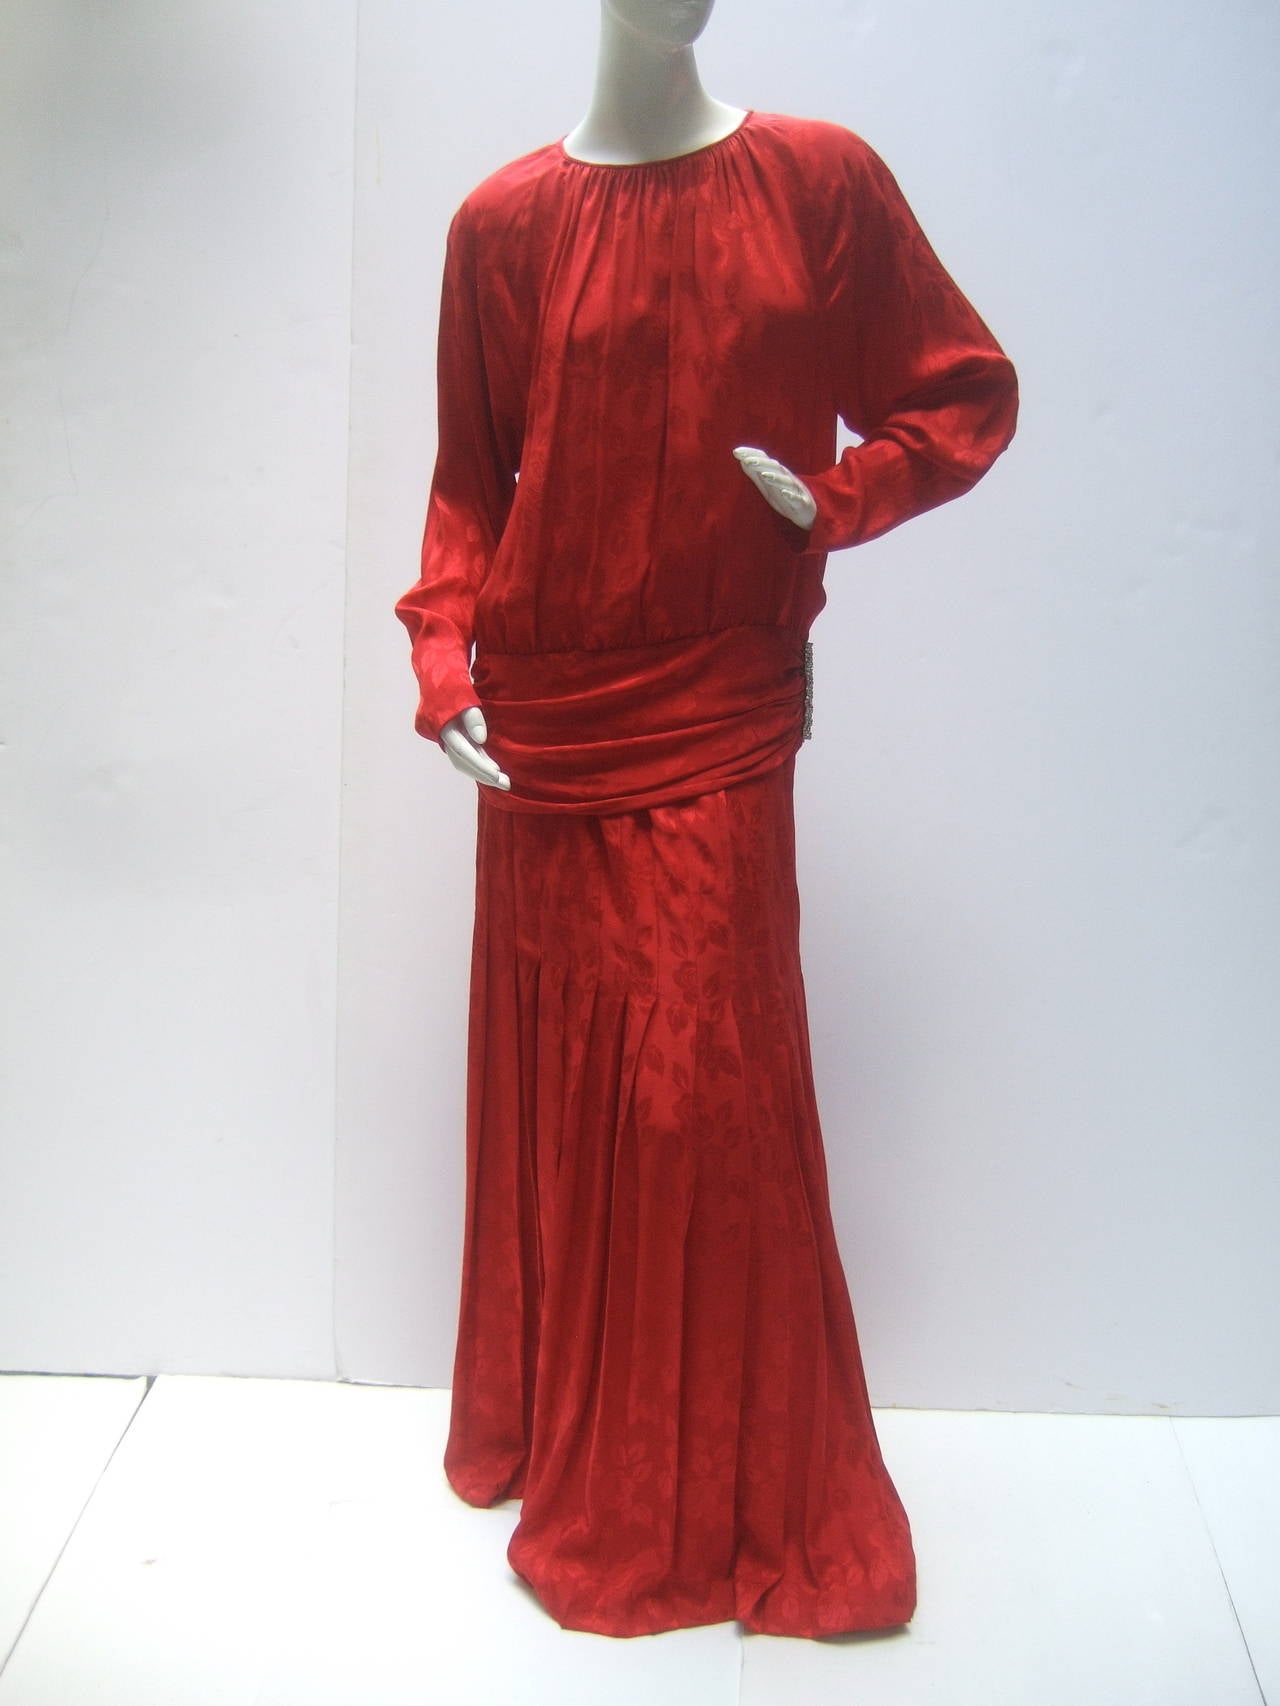 Oscar de la Renta Miss O Scarlet silk blouse & maxi skirt US Size 10
The elegant ensemble is designed with sumptuous silk
with a subtle rose print pattern. The tunic style blouse
has pleated detail around the neckline and across the
contrasting